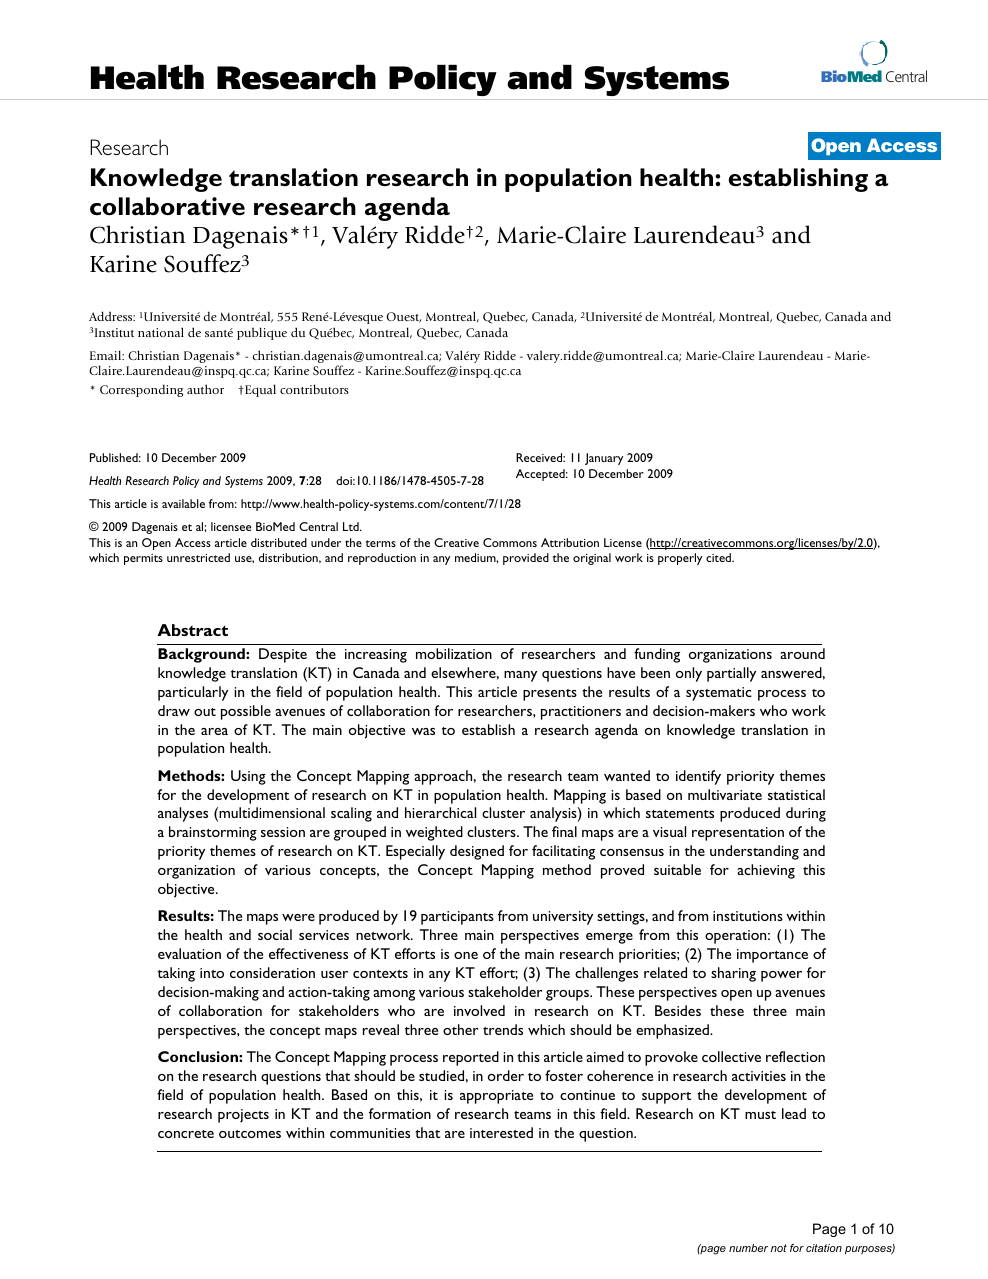 Knowledge Translation Research In Population Health Establishing A Collaborative Research Agenda Topic Of Research Paper In Economics And Business Download Scholarly Article Pdf And Read For Free On Cyberleninka Open Science